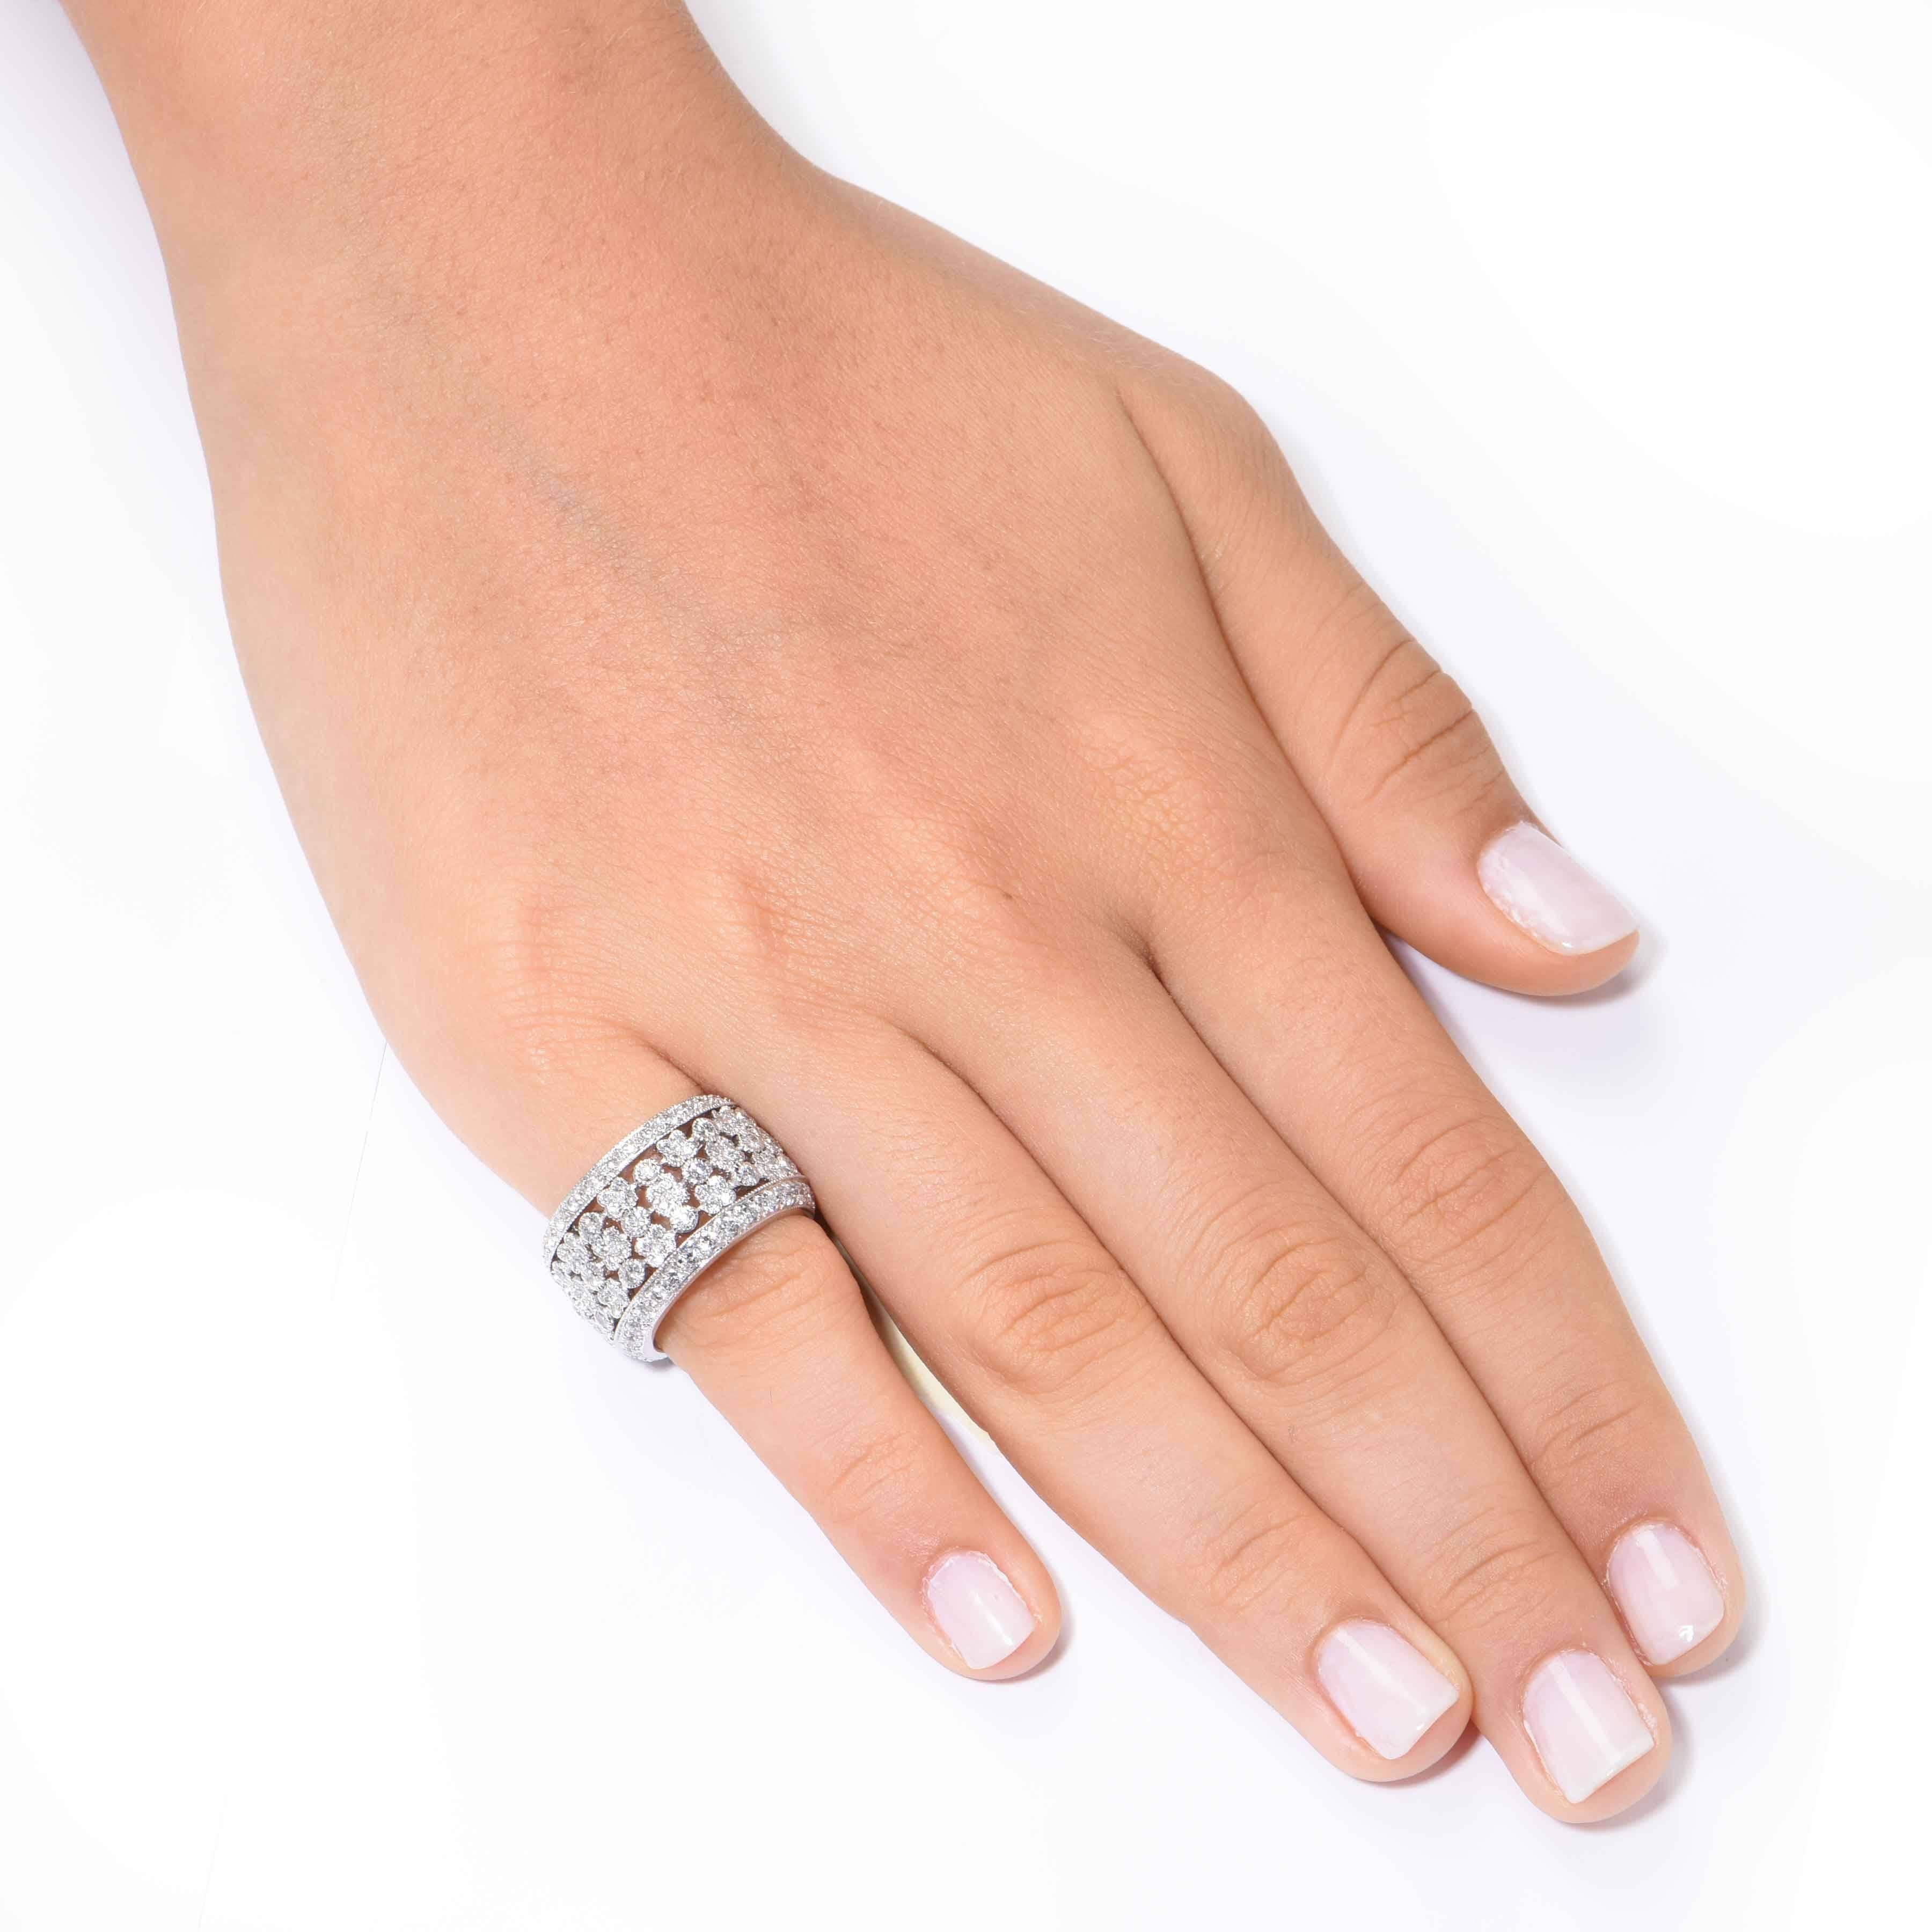 3.11 Carat Diamond Five Row Platinum Band featuring 206 round cut diamonds with a total weight of 3.11 carats. H/I Color SI1 Clarity.

Ring Size: 6 (cannot be sized)
Metal Type: Platinum (tested and/or stamped)
Metal Weight: 16.3 Grams